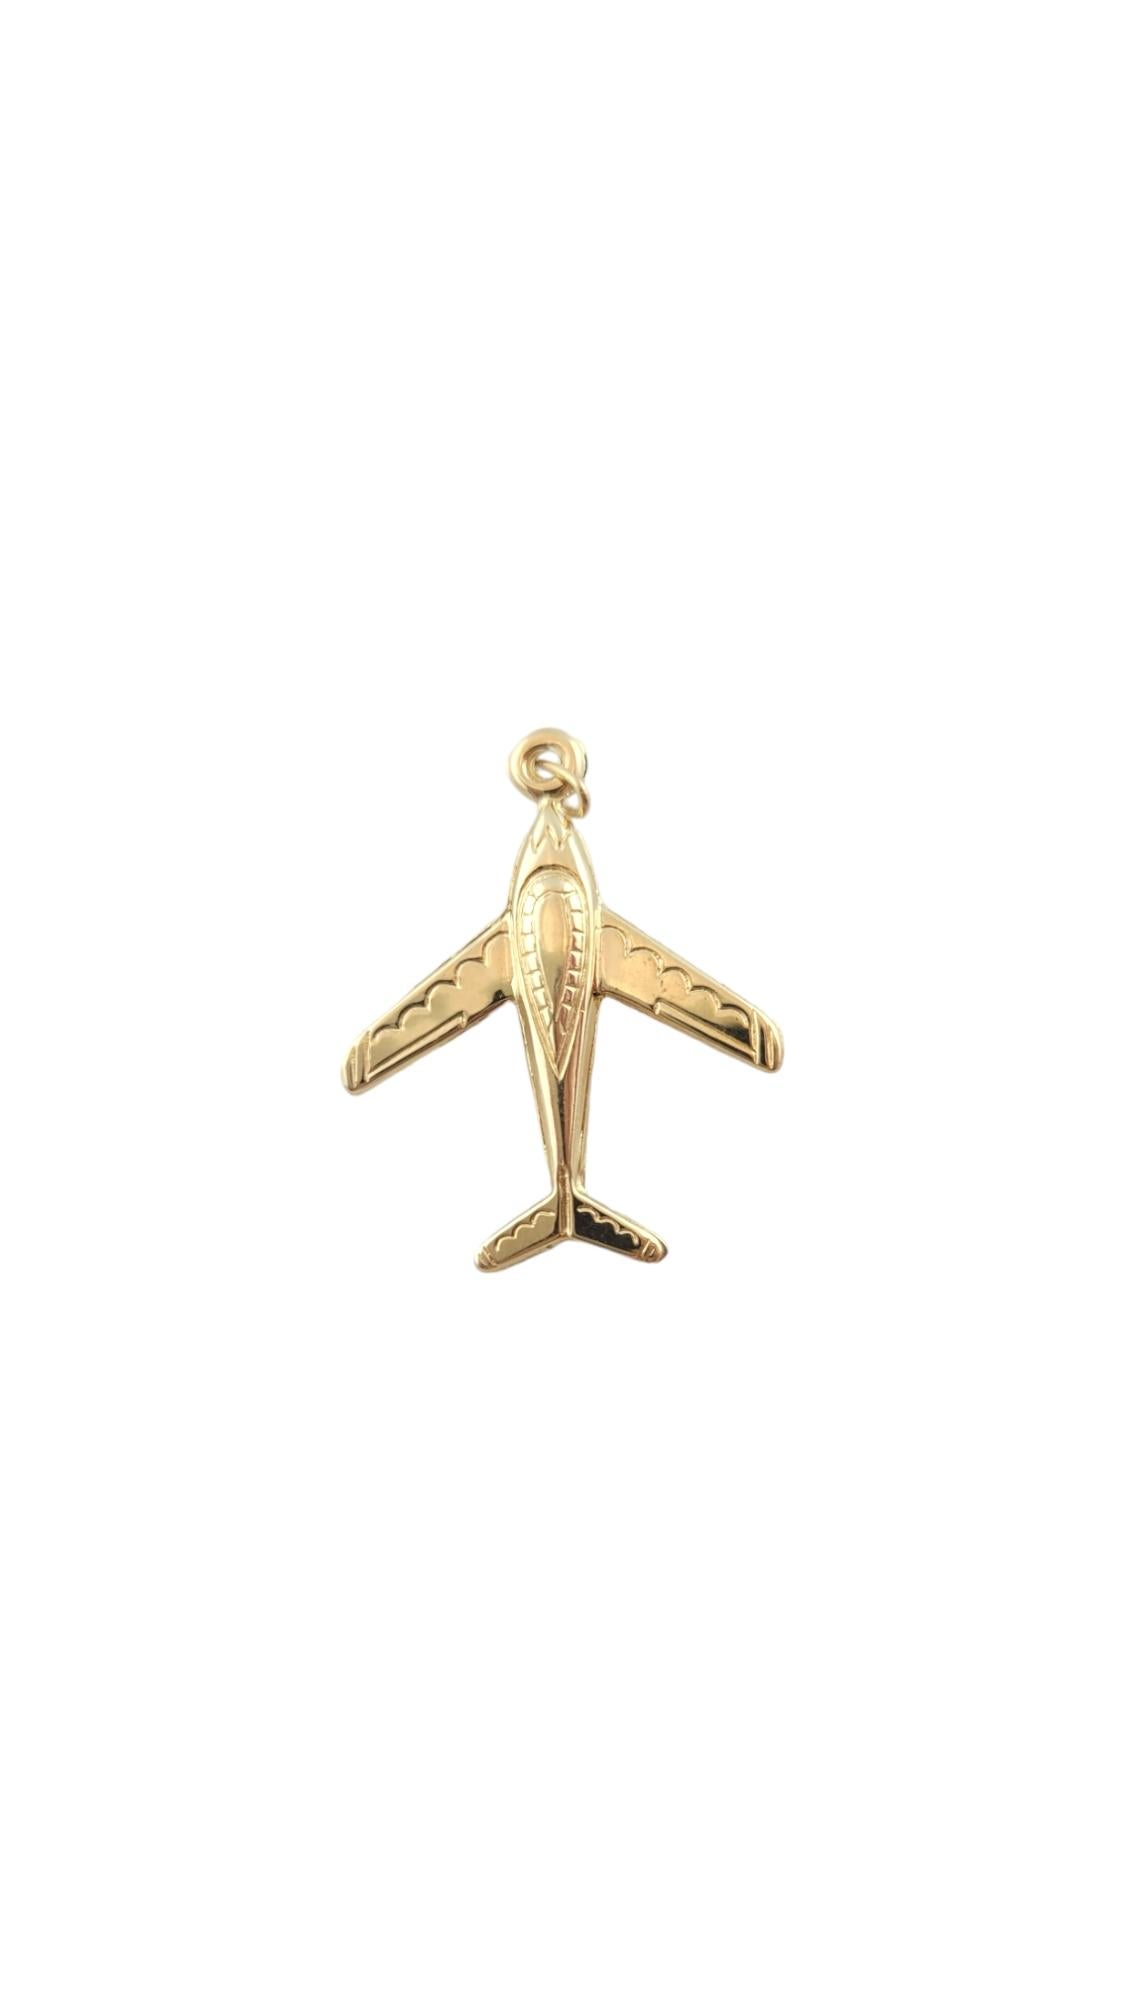 Vintage 14K Yellow Gold Airplane Charm -

Embark on a journey of style with this airplane charm that is beautifully detailed in 14K yellow gold. 

Size: 20mm X 20.6mm 

Weight: 0.5 g/ 0.3dwt

Hallmark: 14K

*Chain not included*

Very good condition,